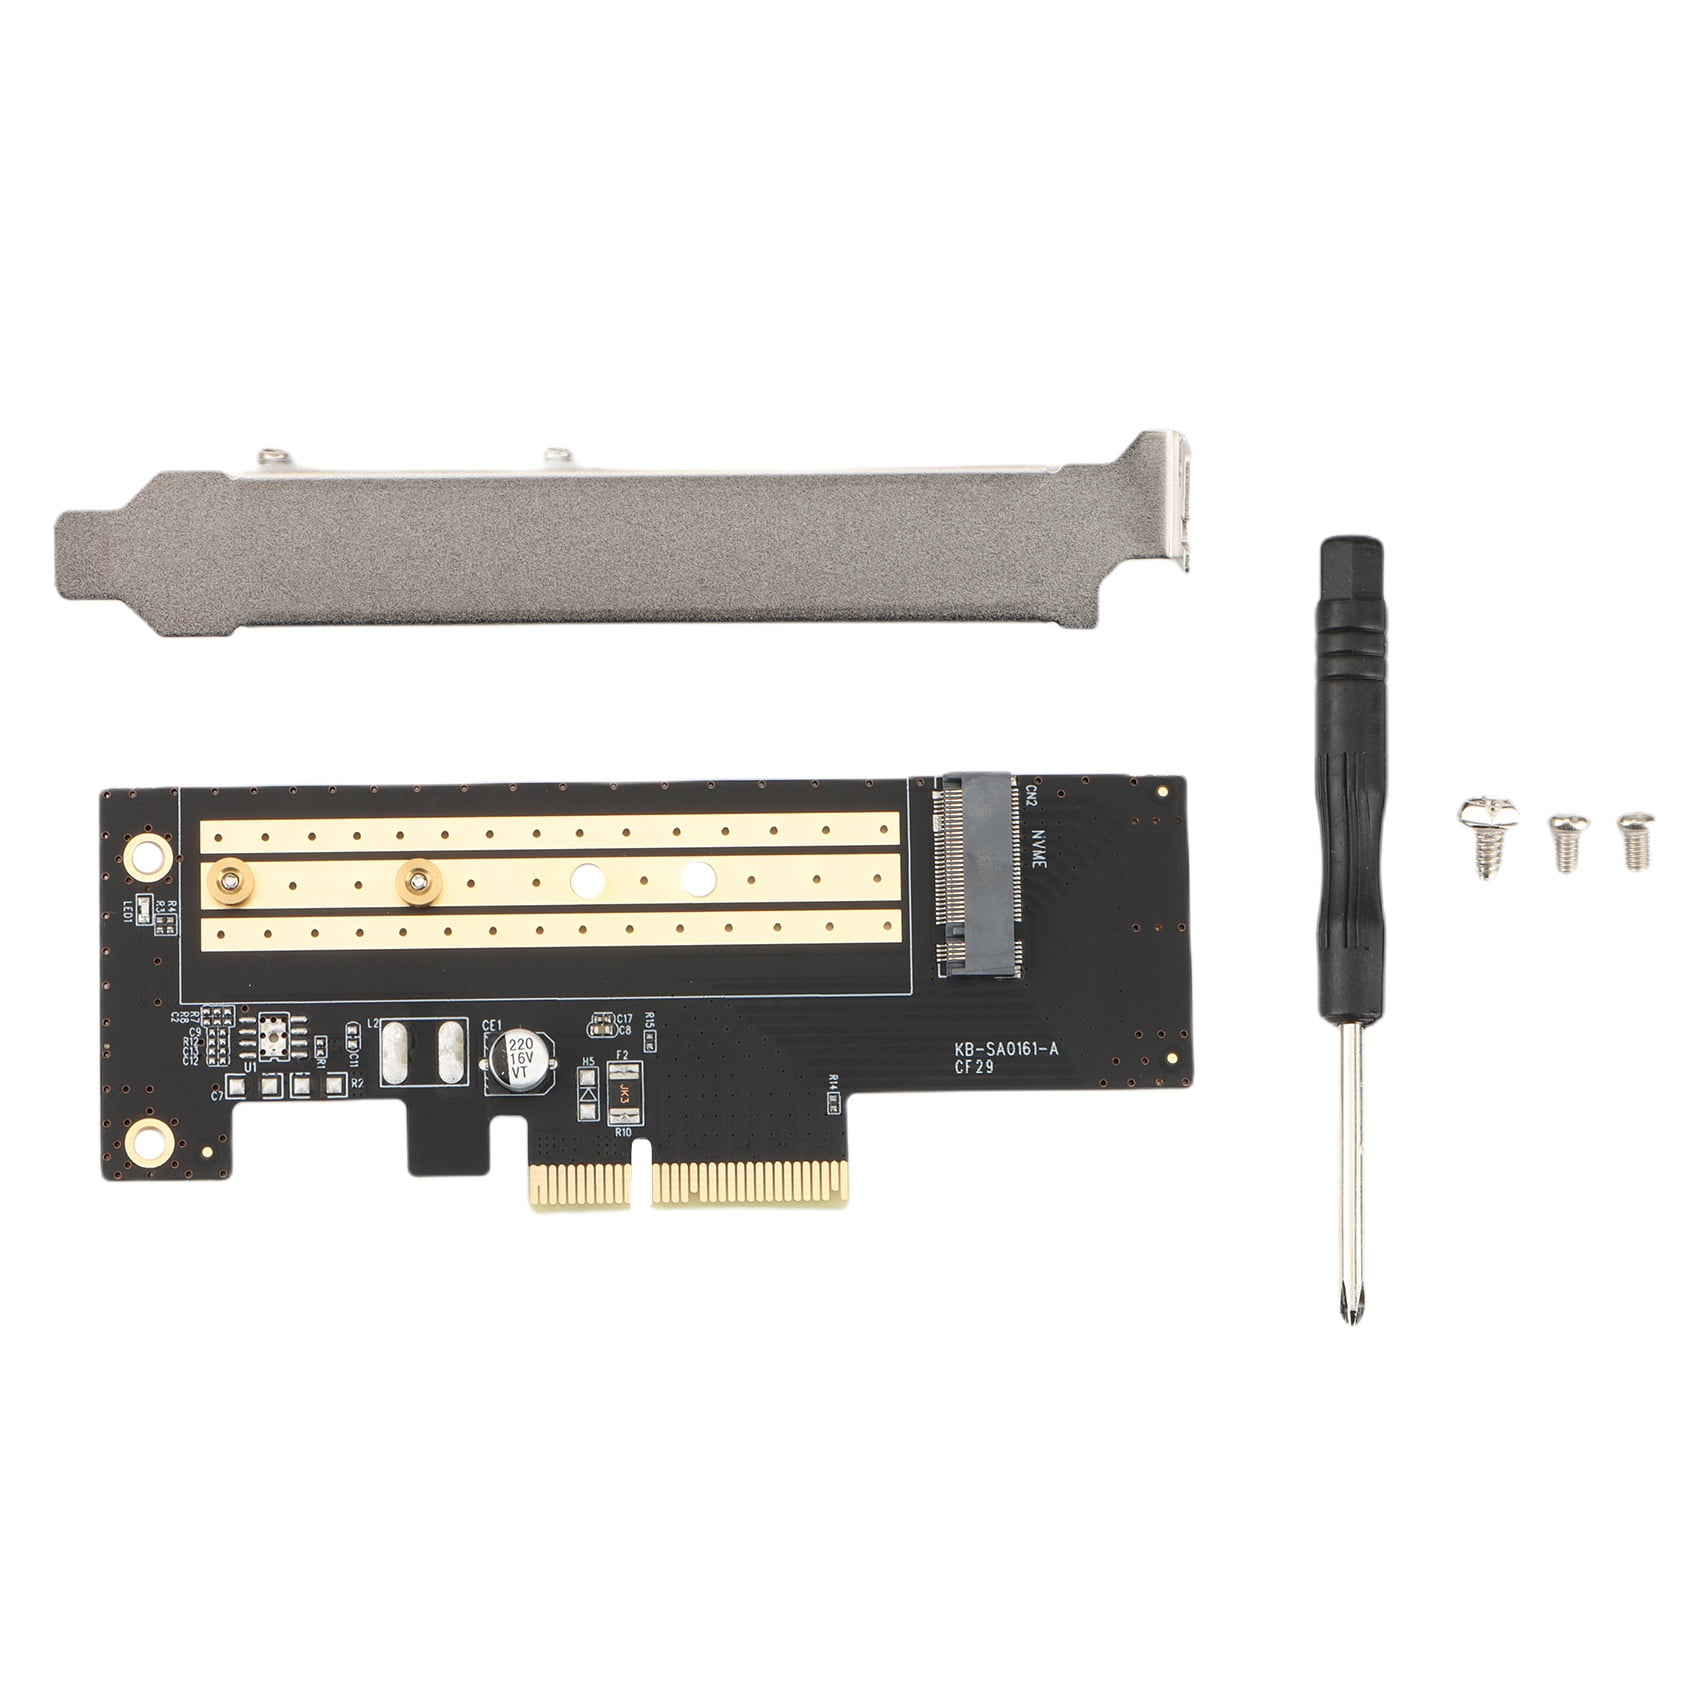 New design of the radiator kit support M.2 2280 SSD,for adapter and motherboard 